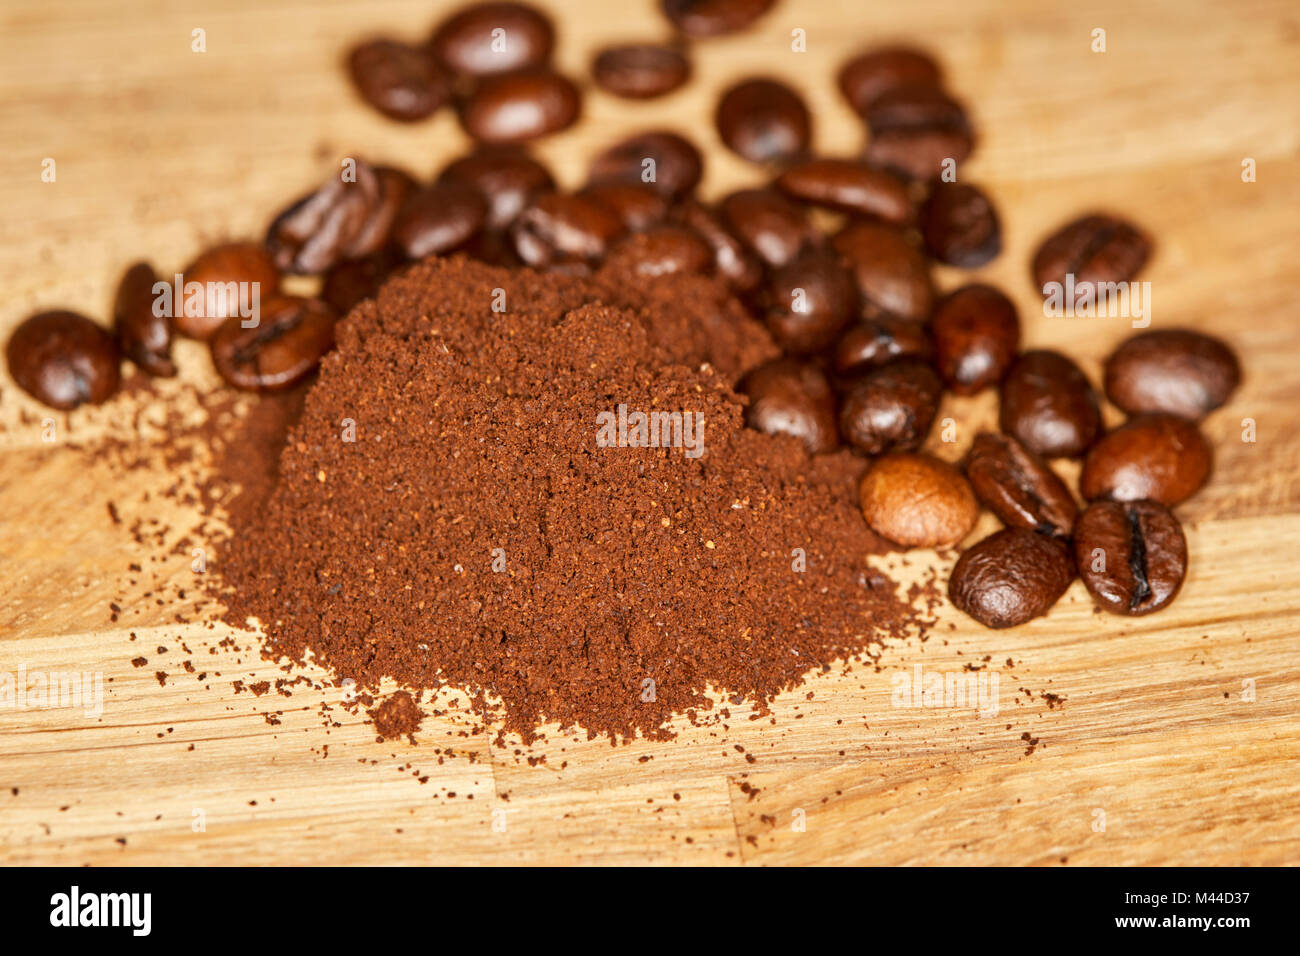 pile of freshly ground coffee with blend of roasted coffee beans Stock Photo